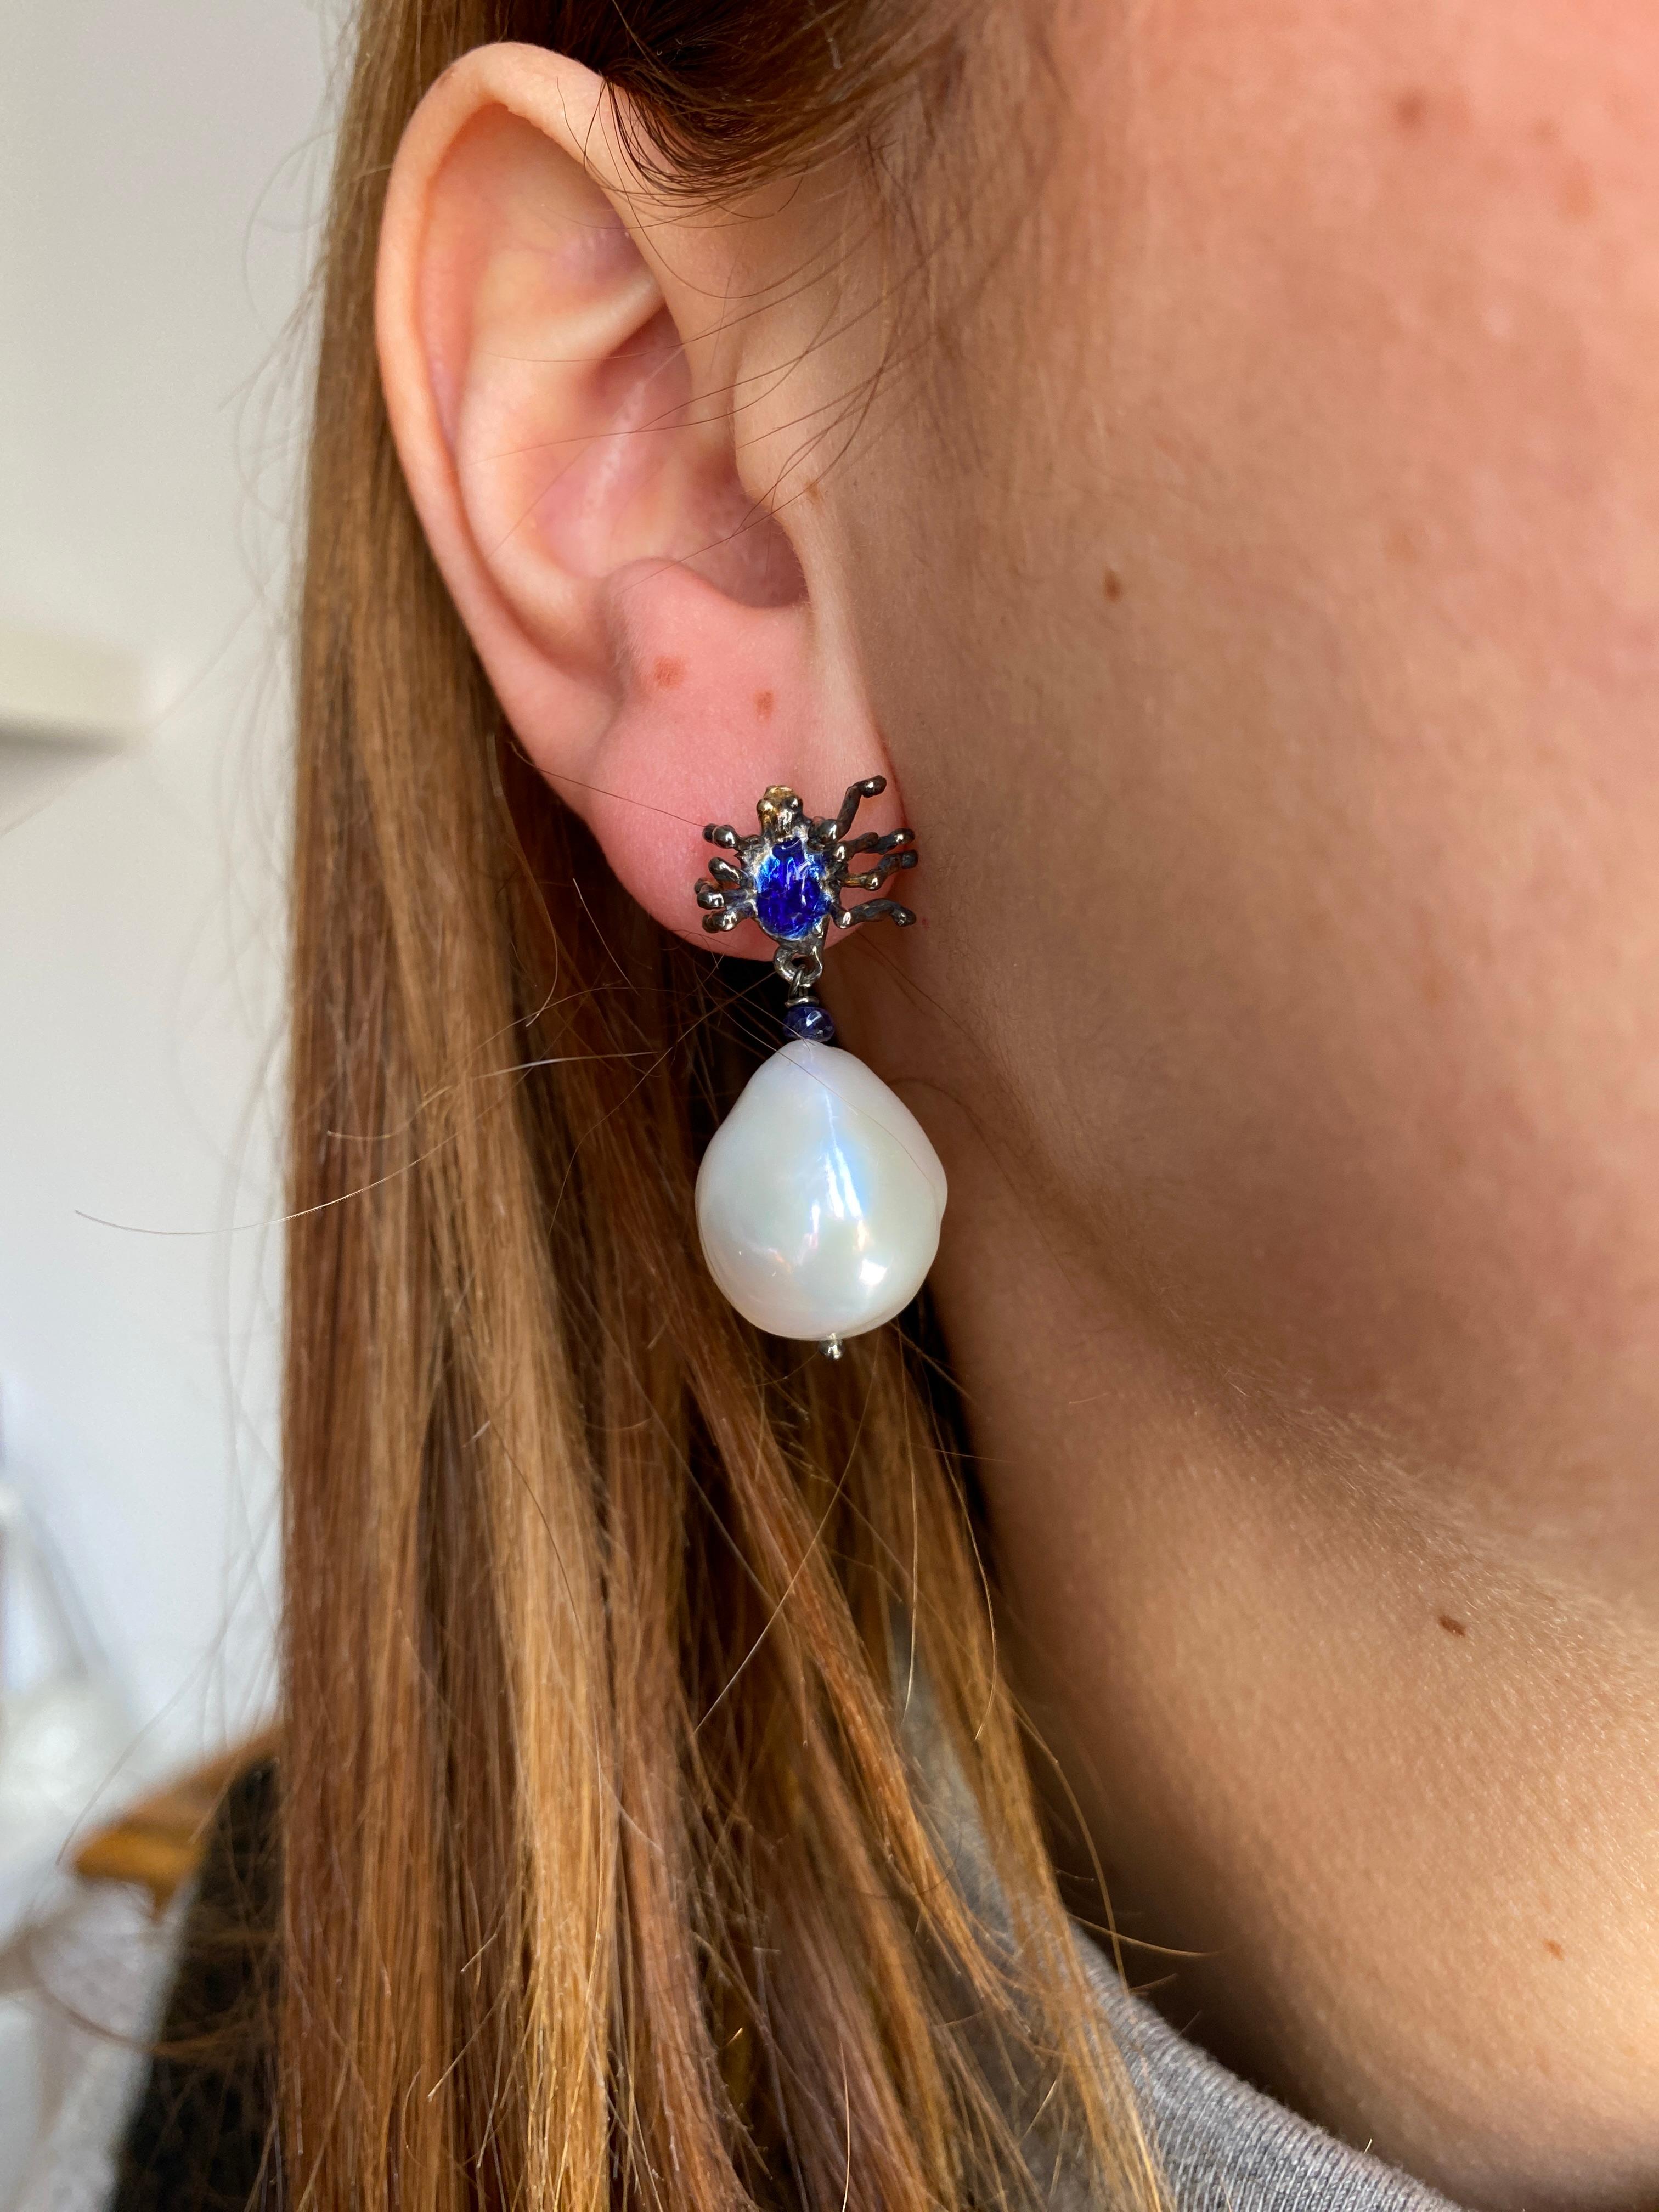 Rossella Ugolini presents a pair of earrings Handcrafted in burnished 18K white gold and hand-glazed in a mesmerizing vivid blue hue.
These earrings feature a unique spider design suspended on the earlobe, the spider elegantly dangles a sapphire